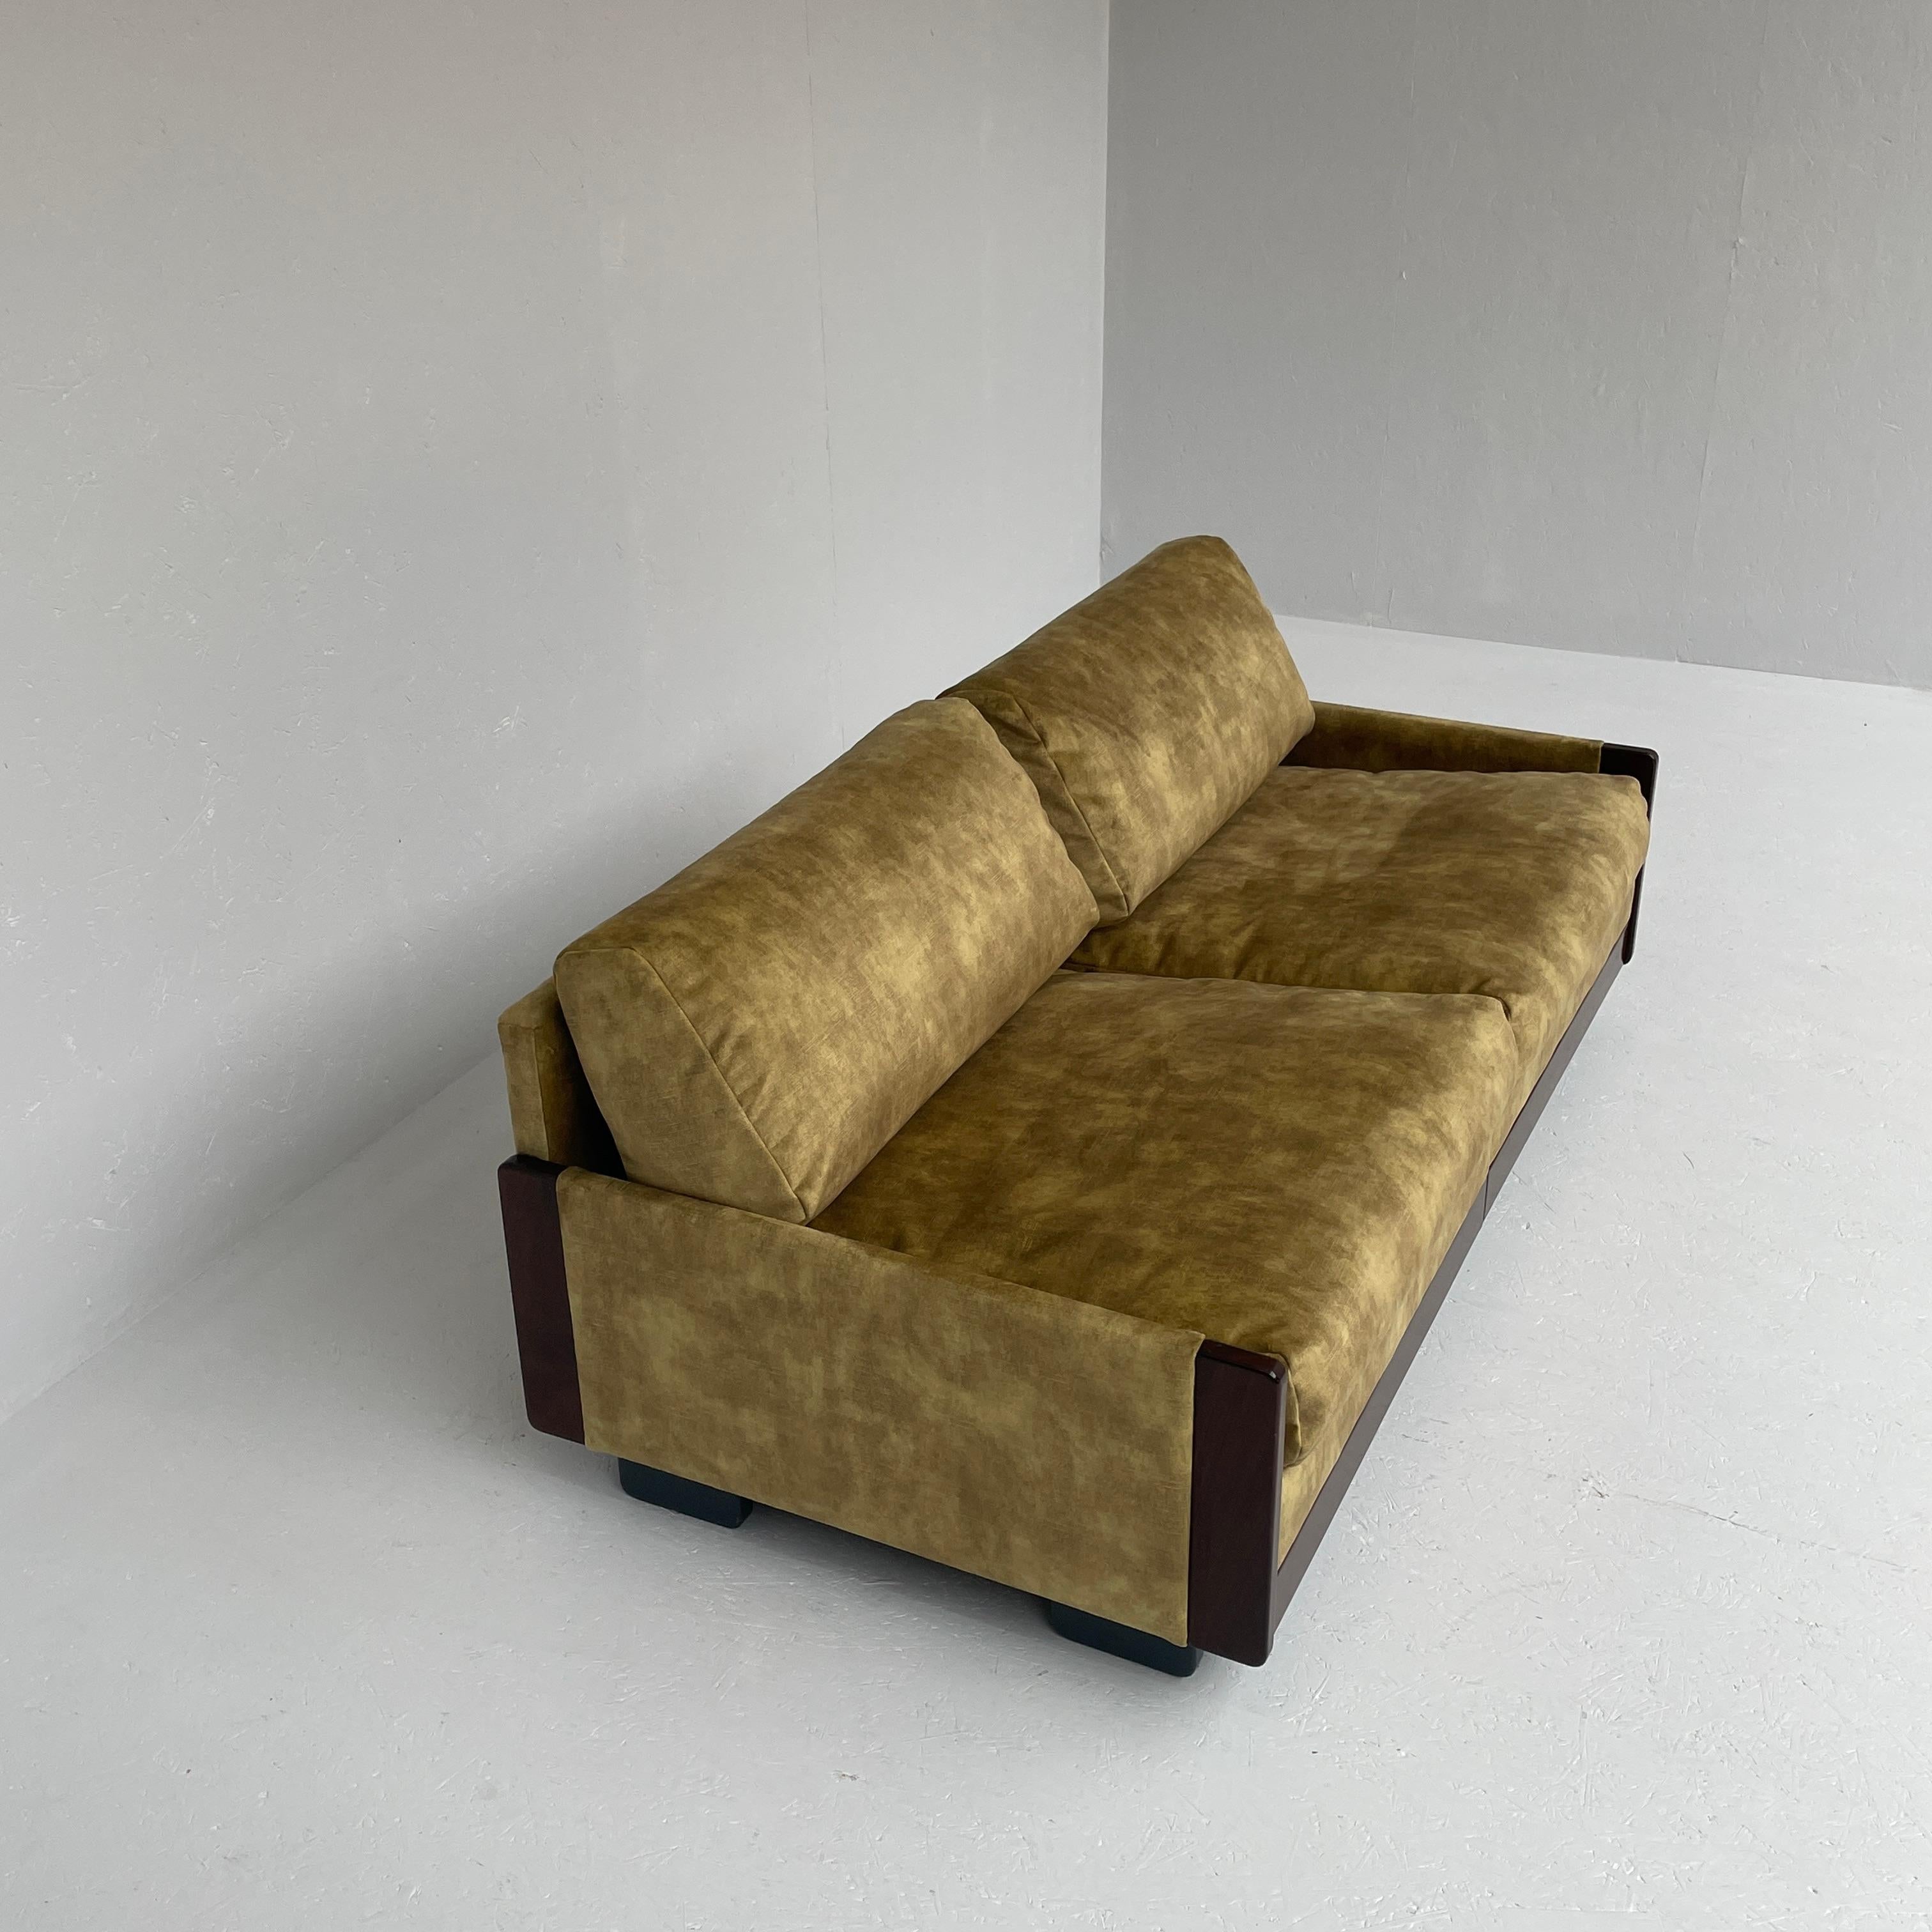 920 3 Seater sofa by Afra & Tobia Scarpa for Cassina, 1970s.

Dimensions: H 64 cm, W 145 cm, D 75 cm, SH 34 cm.

In mint condition, fabric reupholstered in beautiful yellow/green wash.